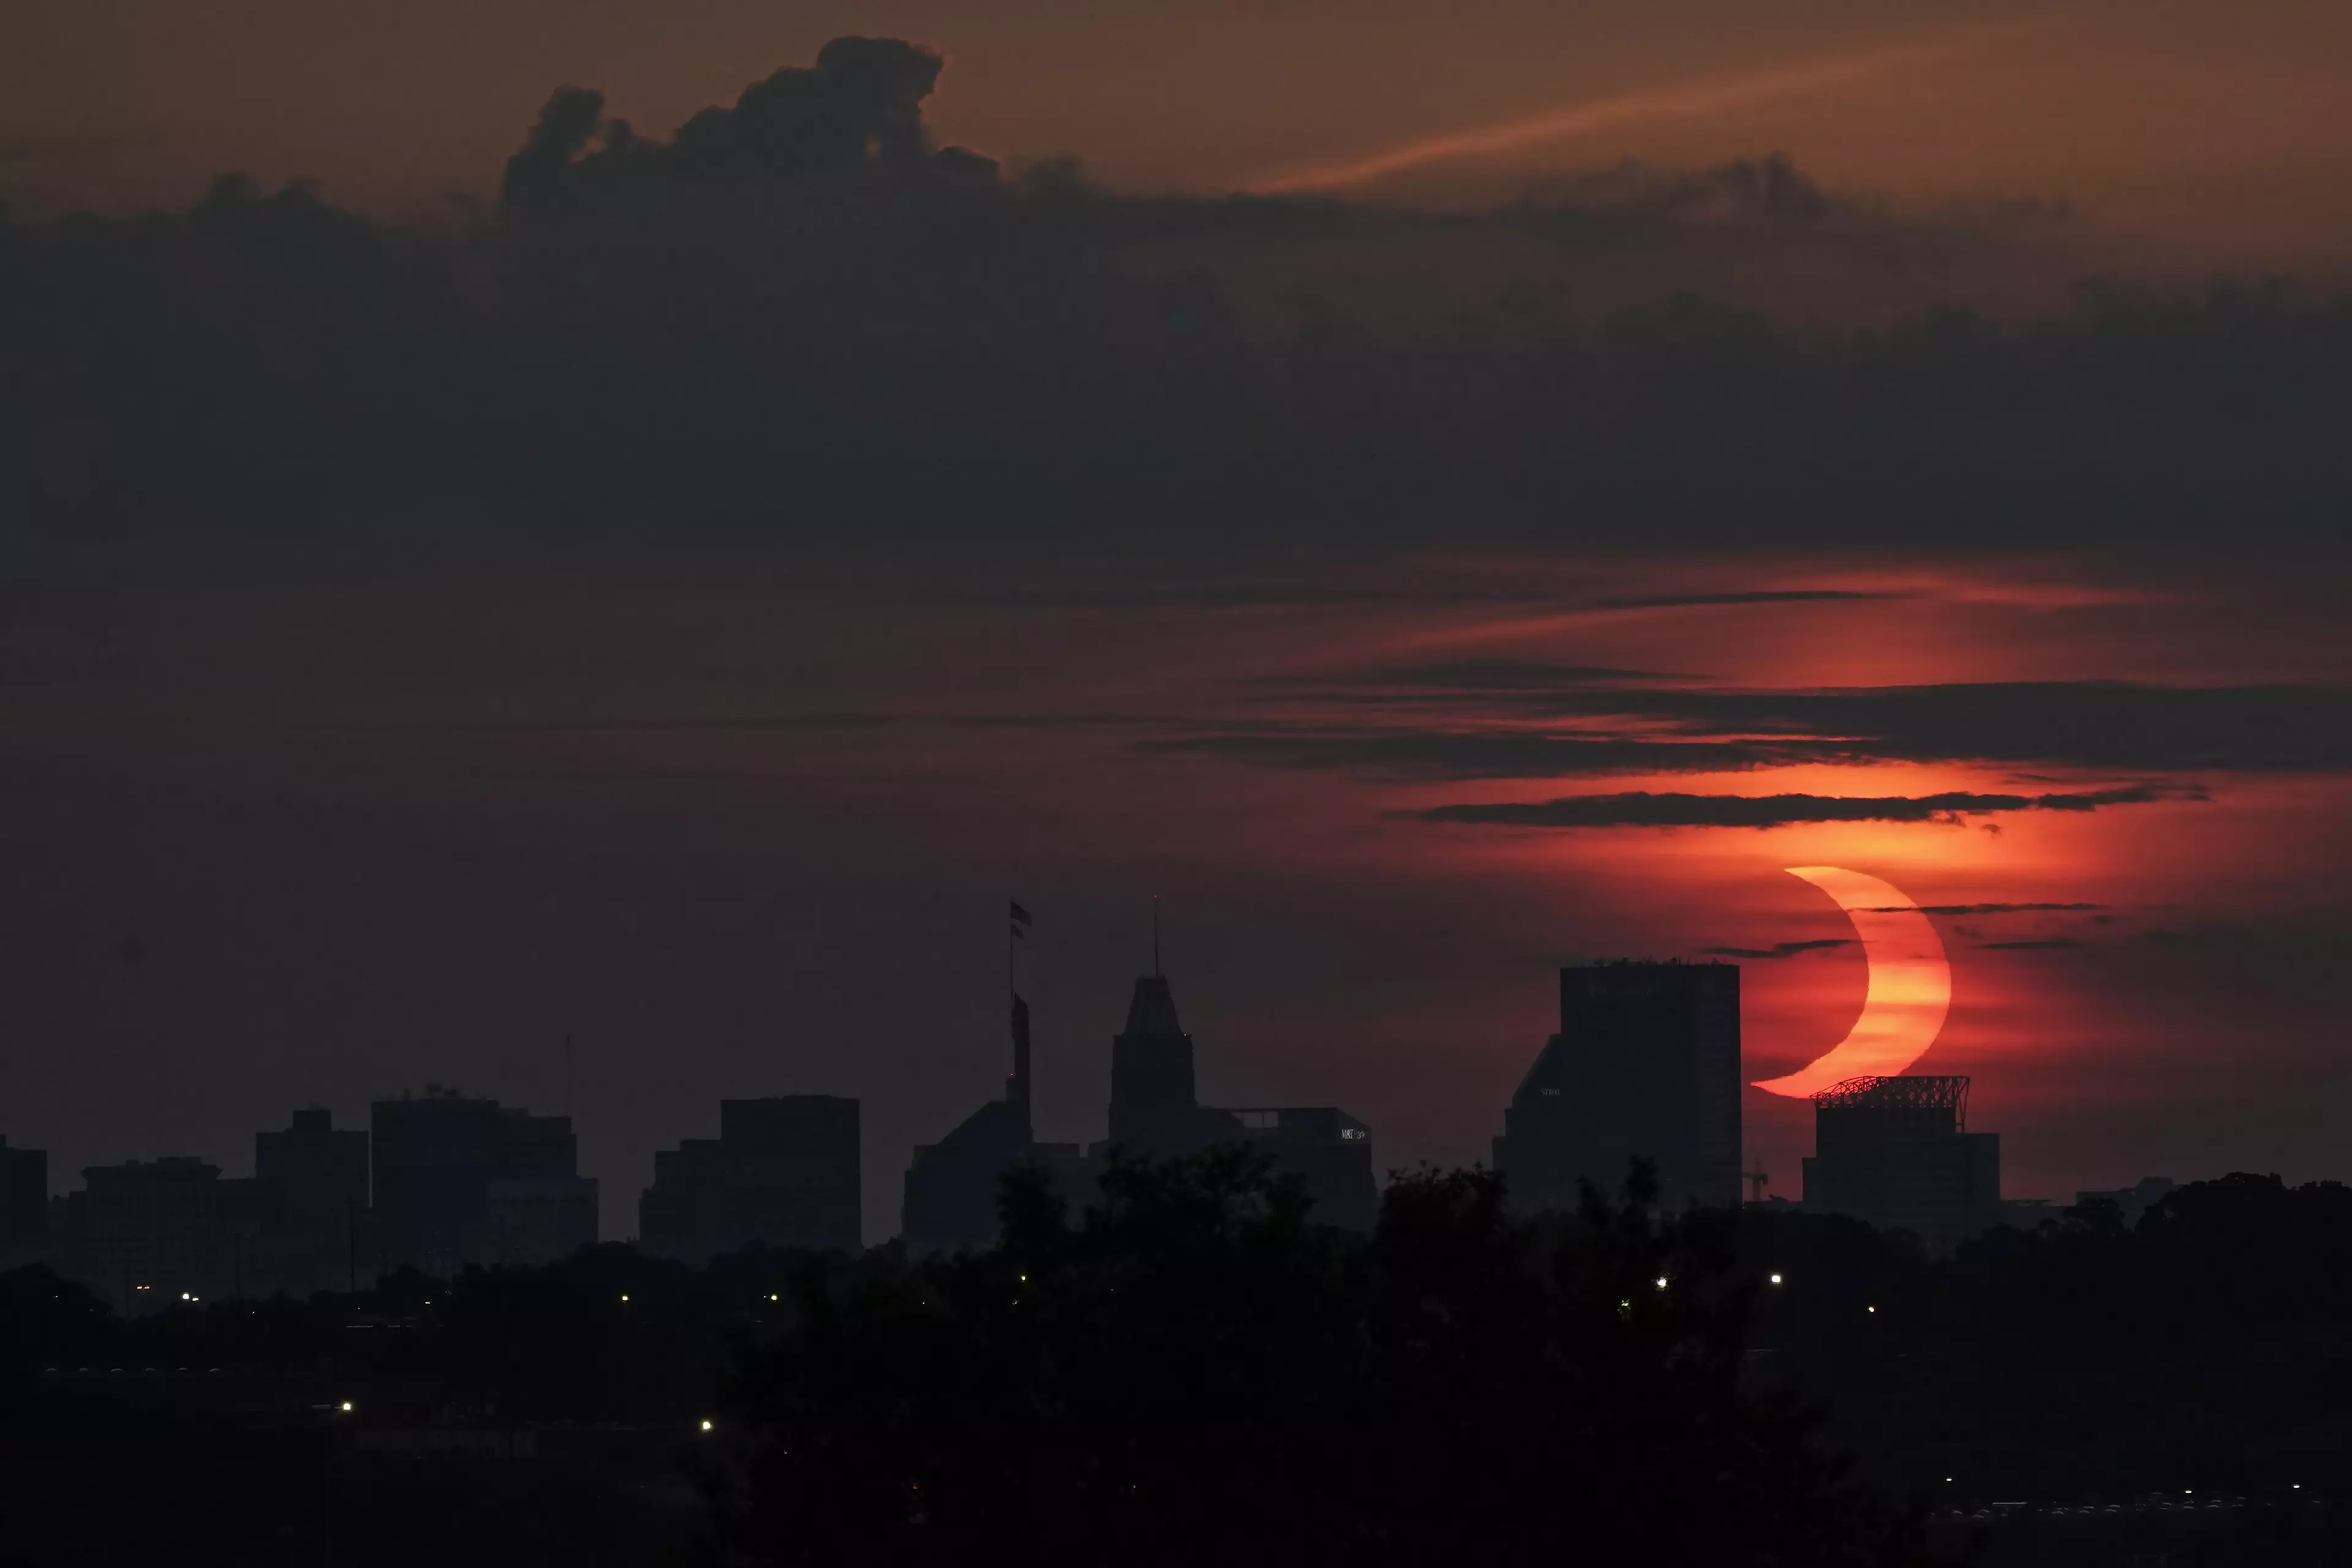 The eclipse photographed in Baltimore today.